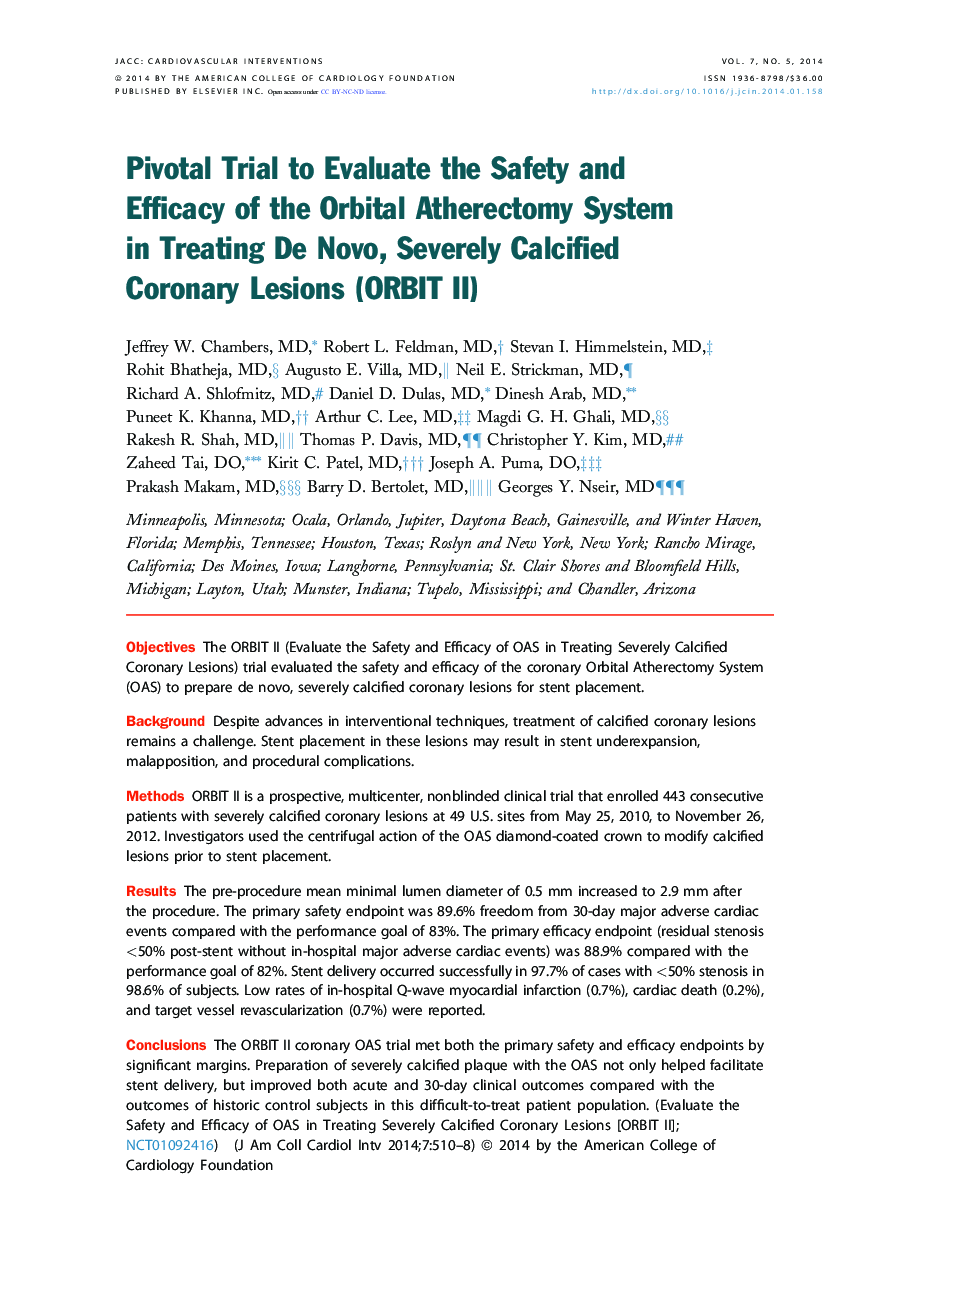 Pivotal Trial to Evaluate the Safety and Efficacy of the Orbital Atherectomy System in Treating De Novo, Severely Calcified Coronary Lesions (ORBIT II)